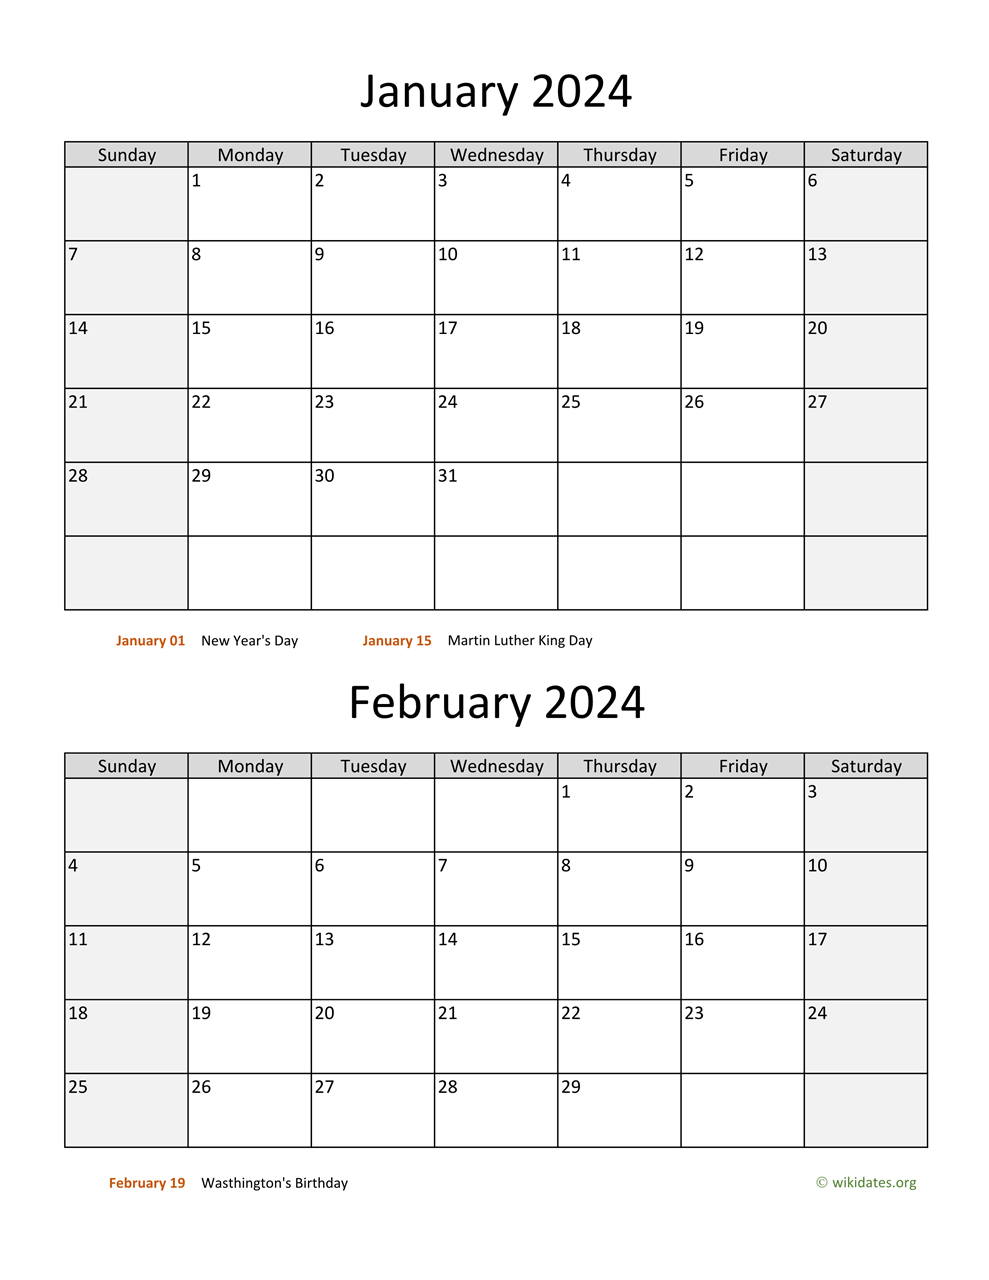 January And February 2024 Calendar | Wikidates for Free Printable January And February 2024 Calendar